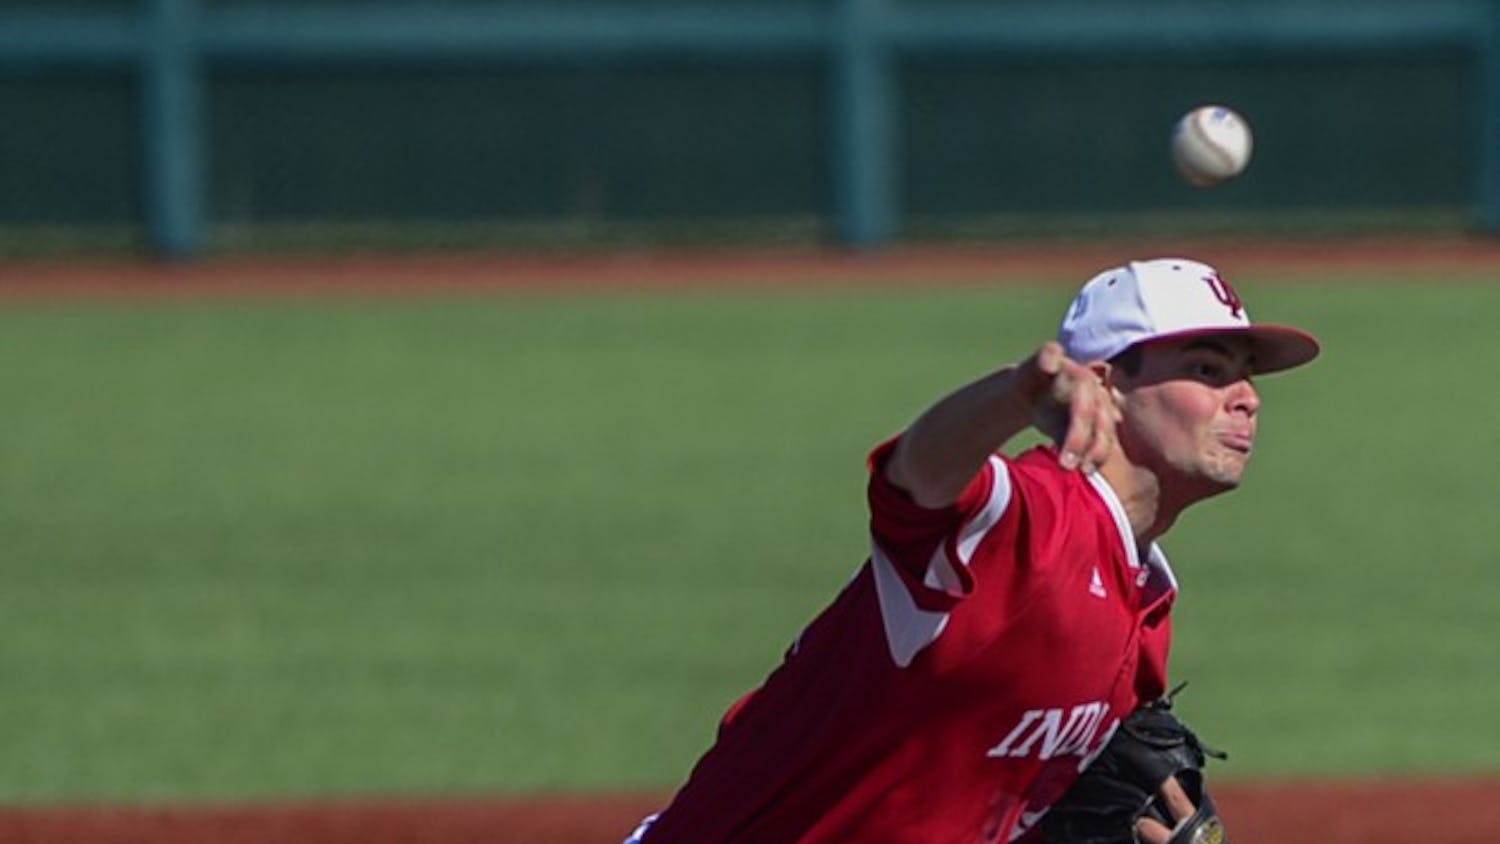 Junior Scott Effross pitches during IU's game against Valparaiso on Tuesday at Bart Kaufman Field. Effross only pitched the first inning of Tuesday's game.